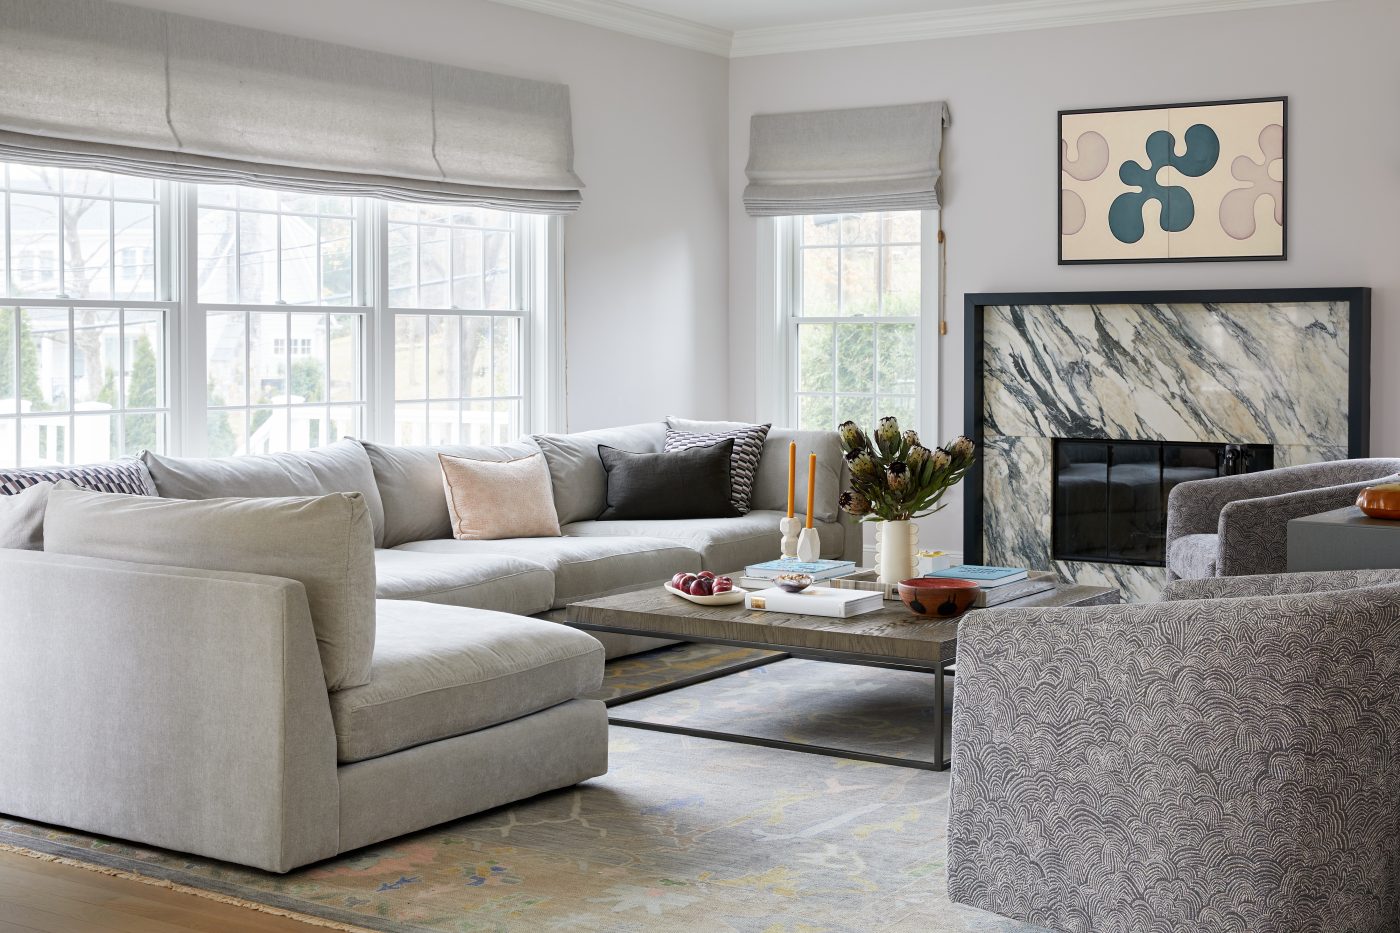 The family room of a home designed by Rachel Sloane Interiors in Larchmont, New York